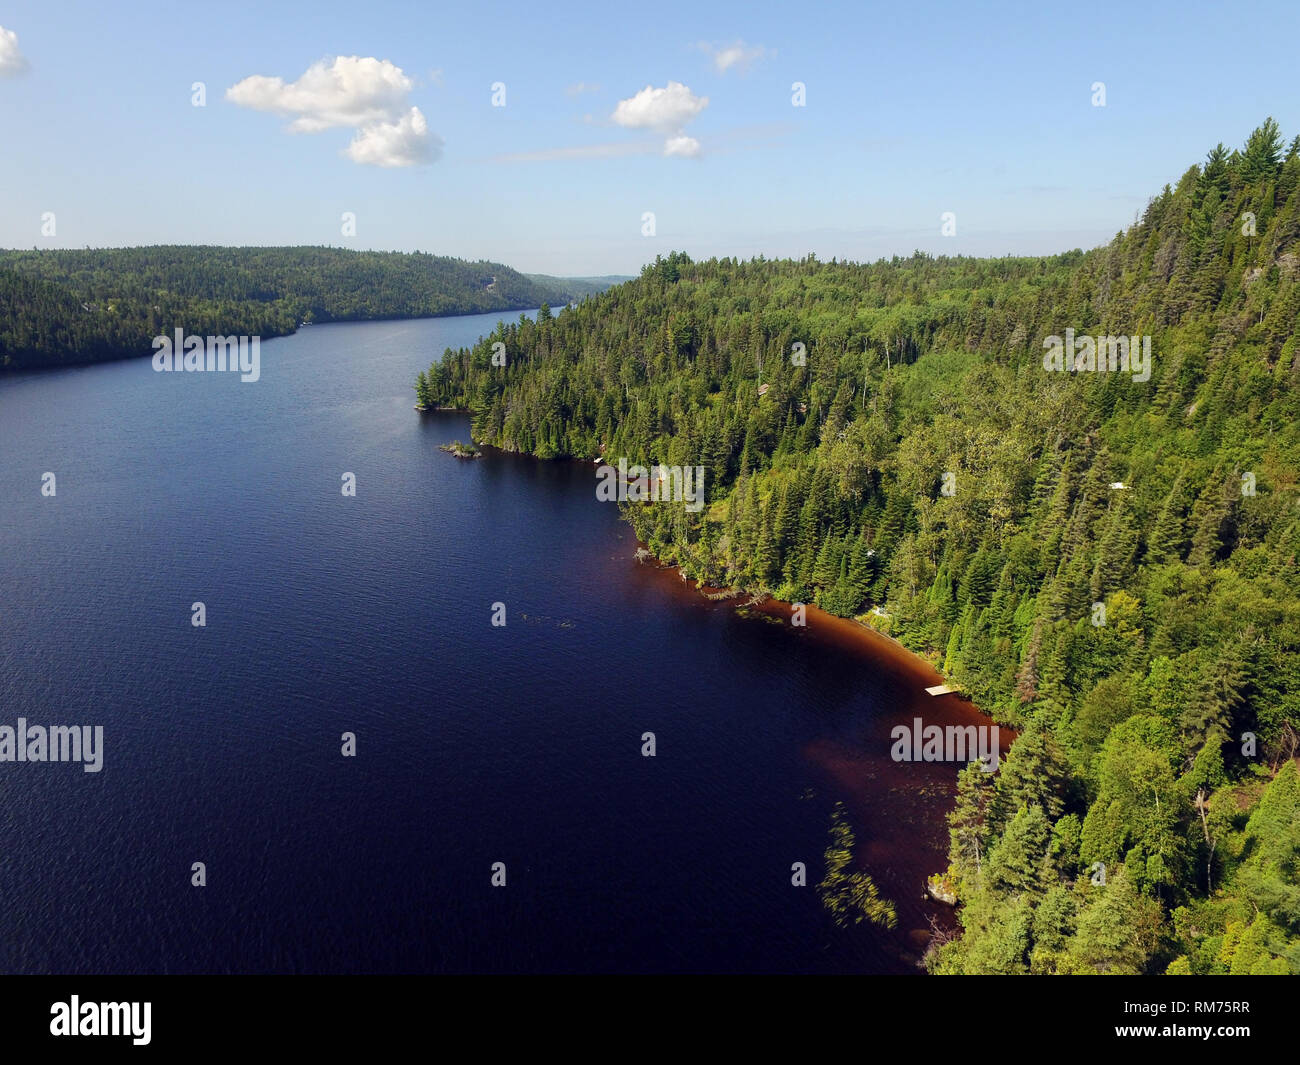 Aerial view of beautiful scenic Saguenay river in Quebec Canada Stock Photo